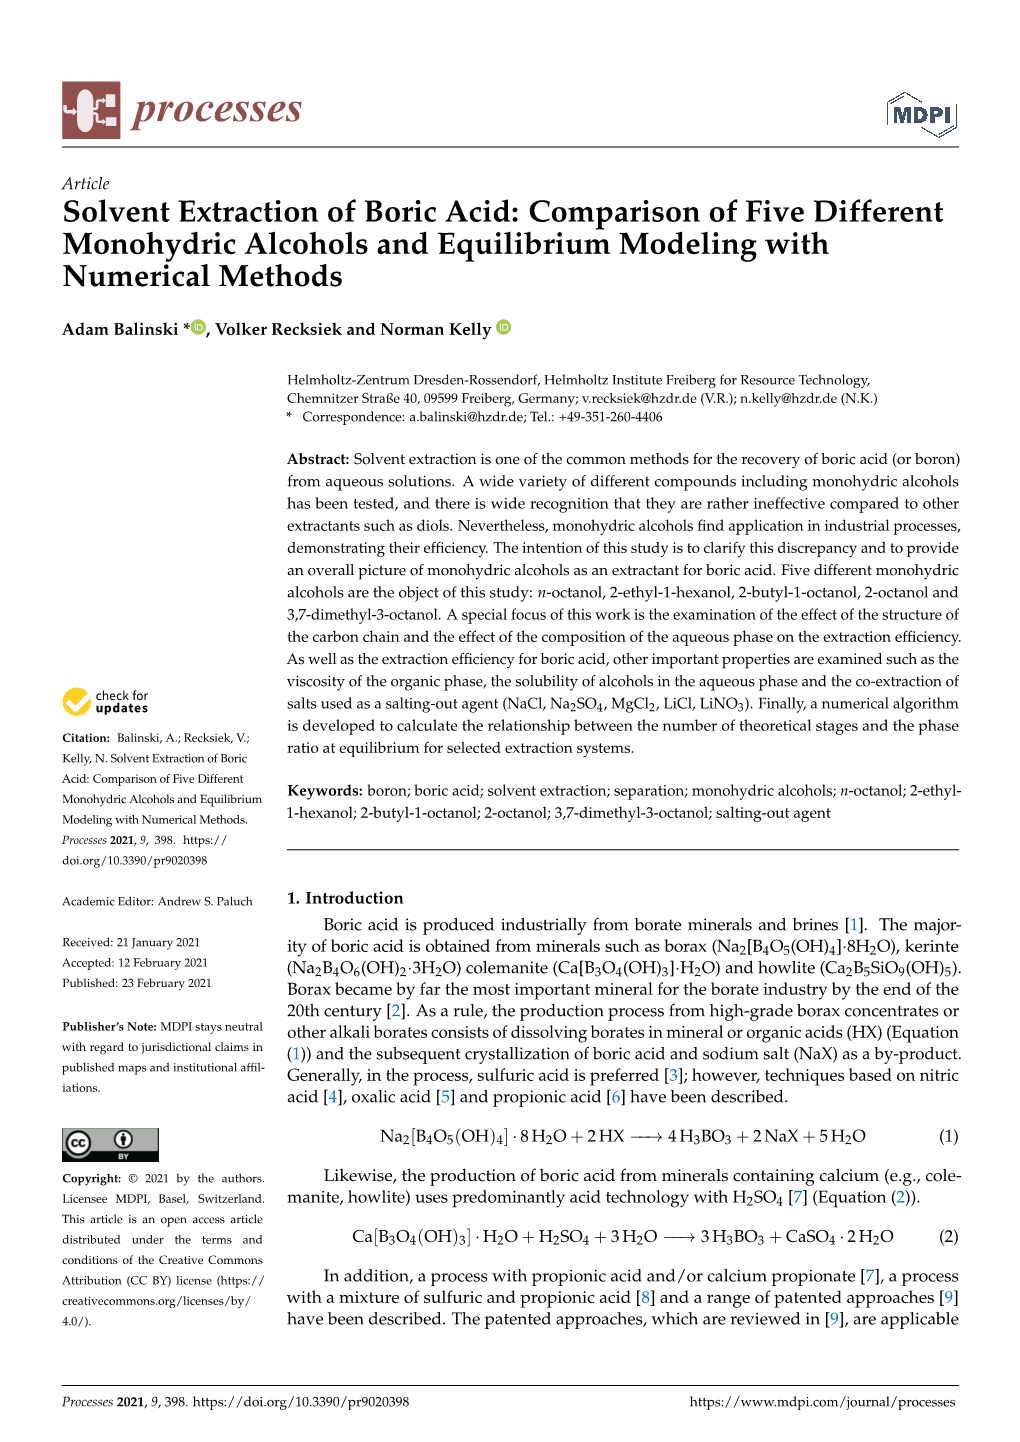 Solvent Extraction of Boric Acid: Comparison of Five Different Monohydric Alcohols and Equilibrium Modeling with Numerical Methods